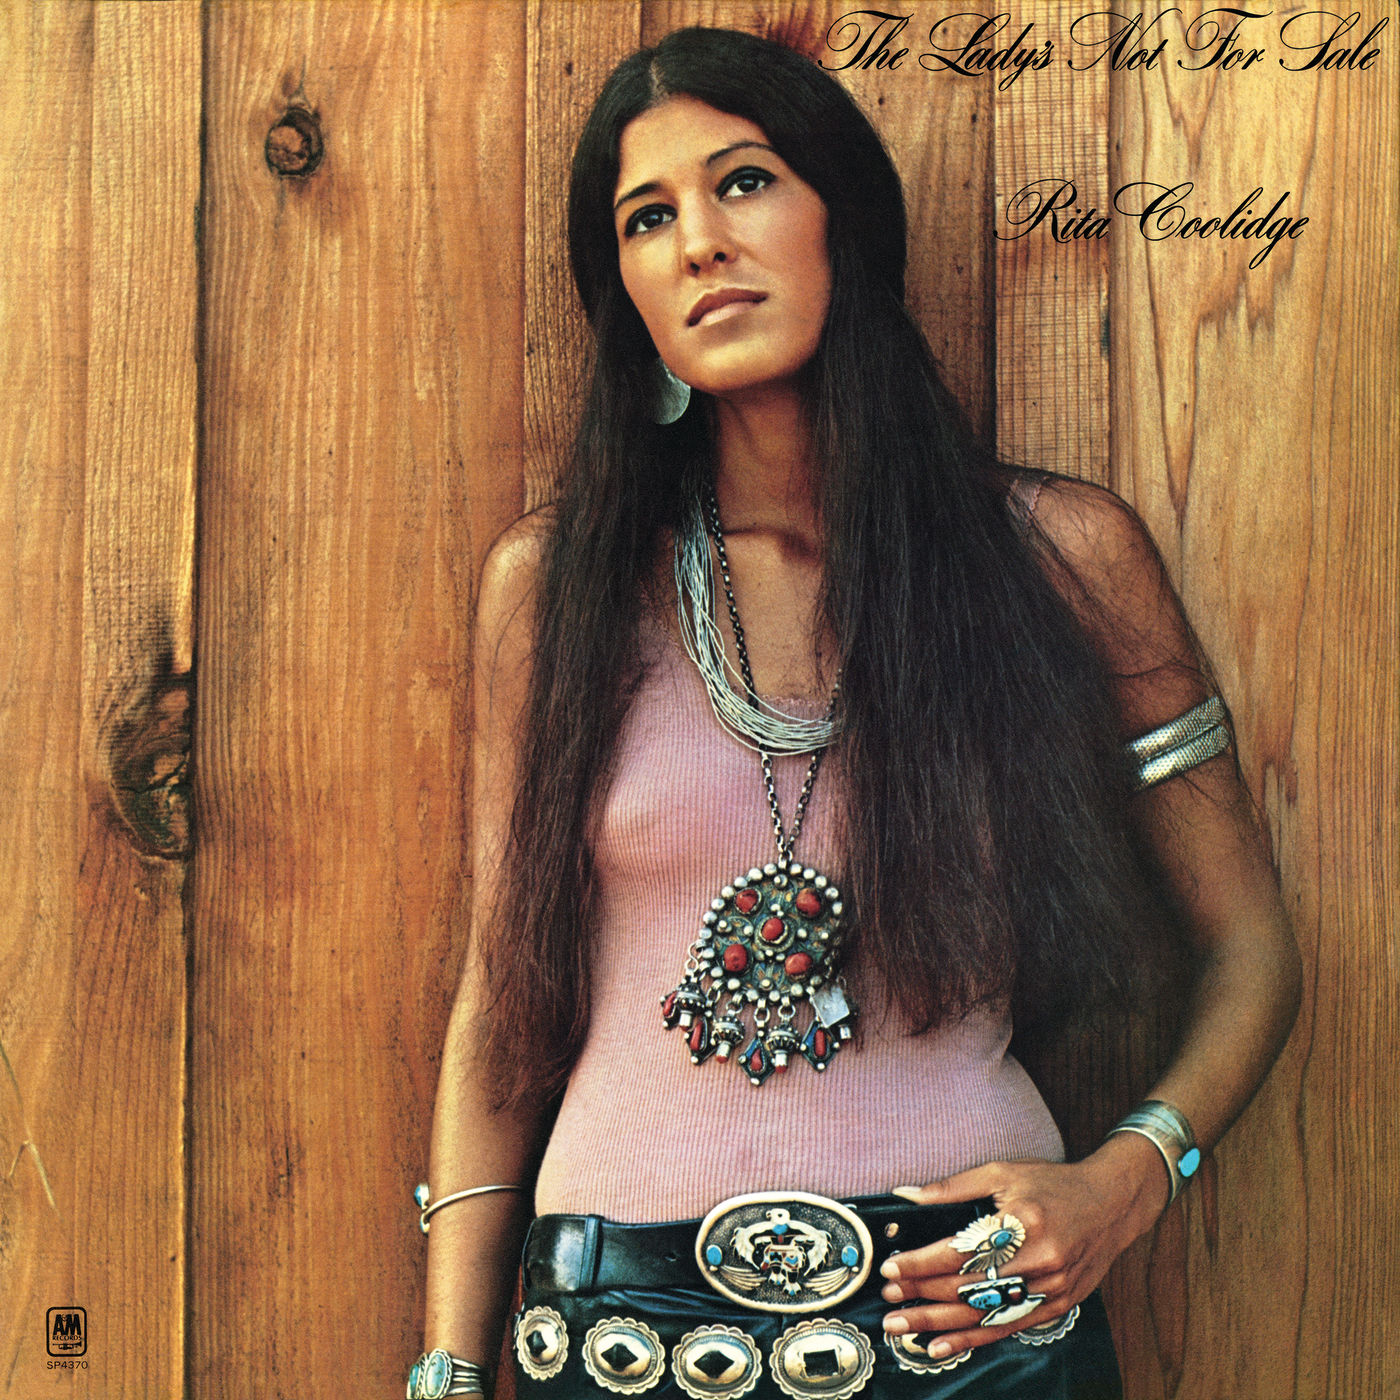 Rita Coolidge – The Lady’s Not For Sale (1972/2021) [FLAC 24bit/96kHz]